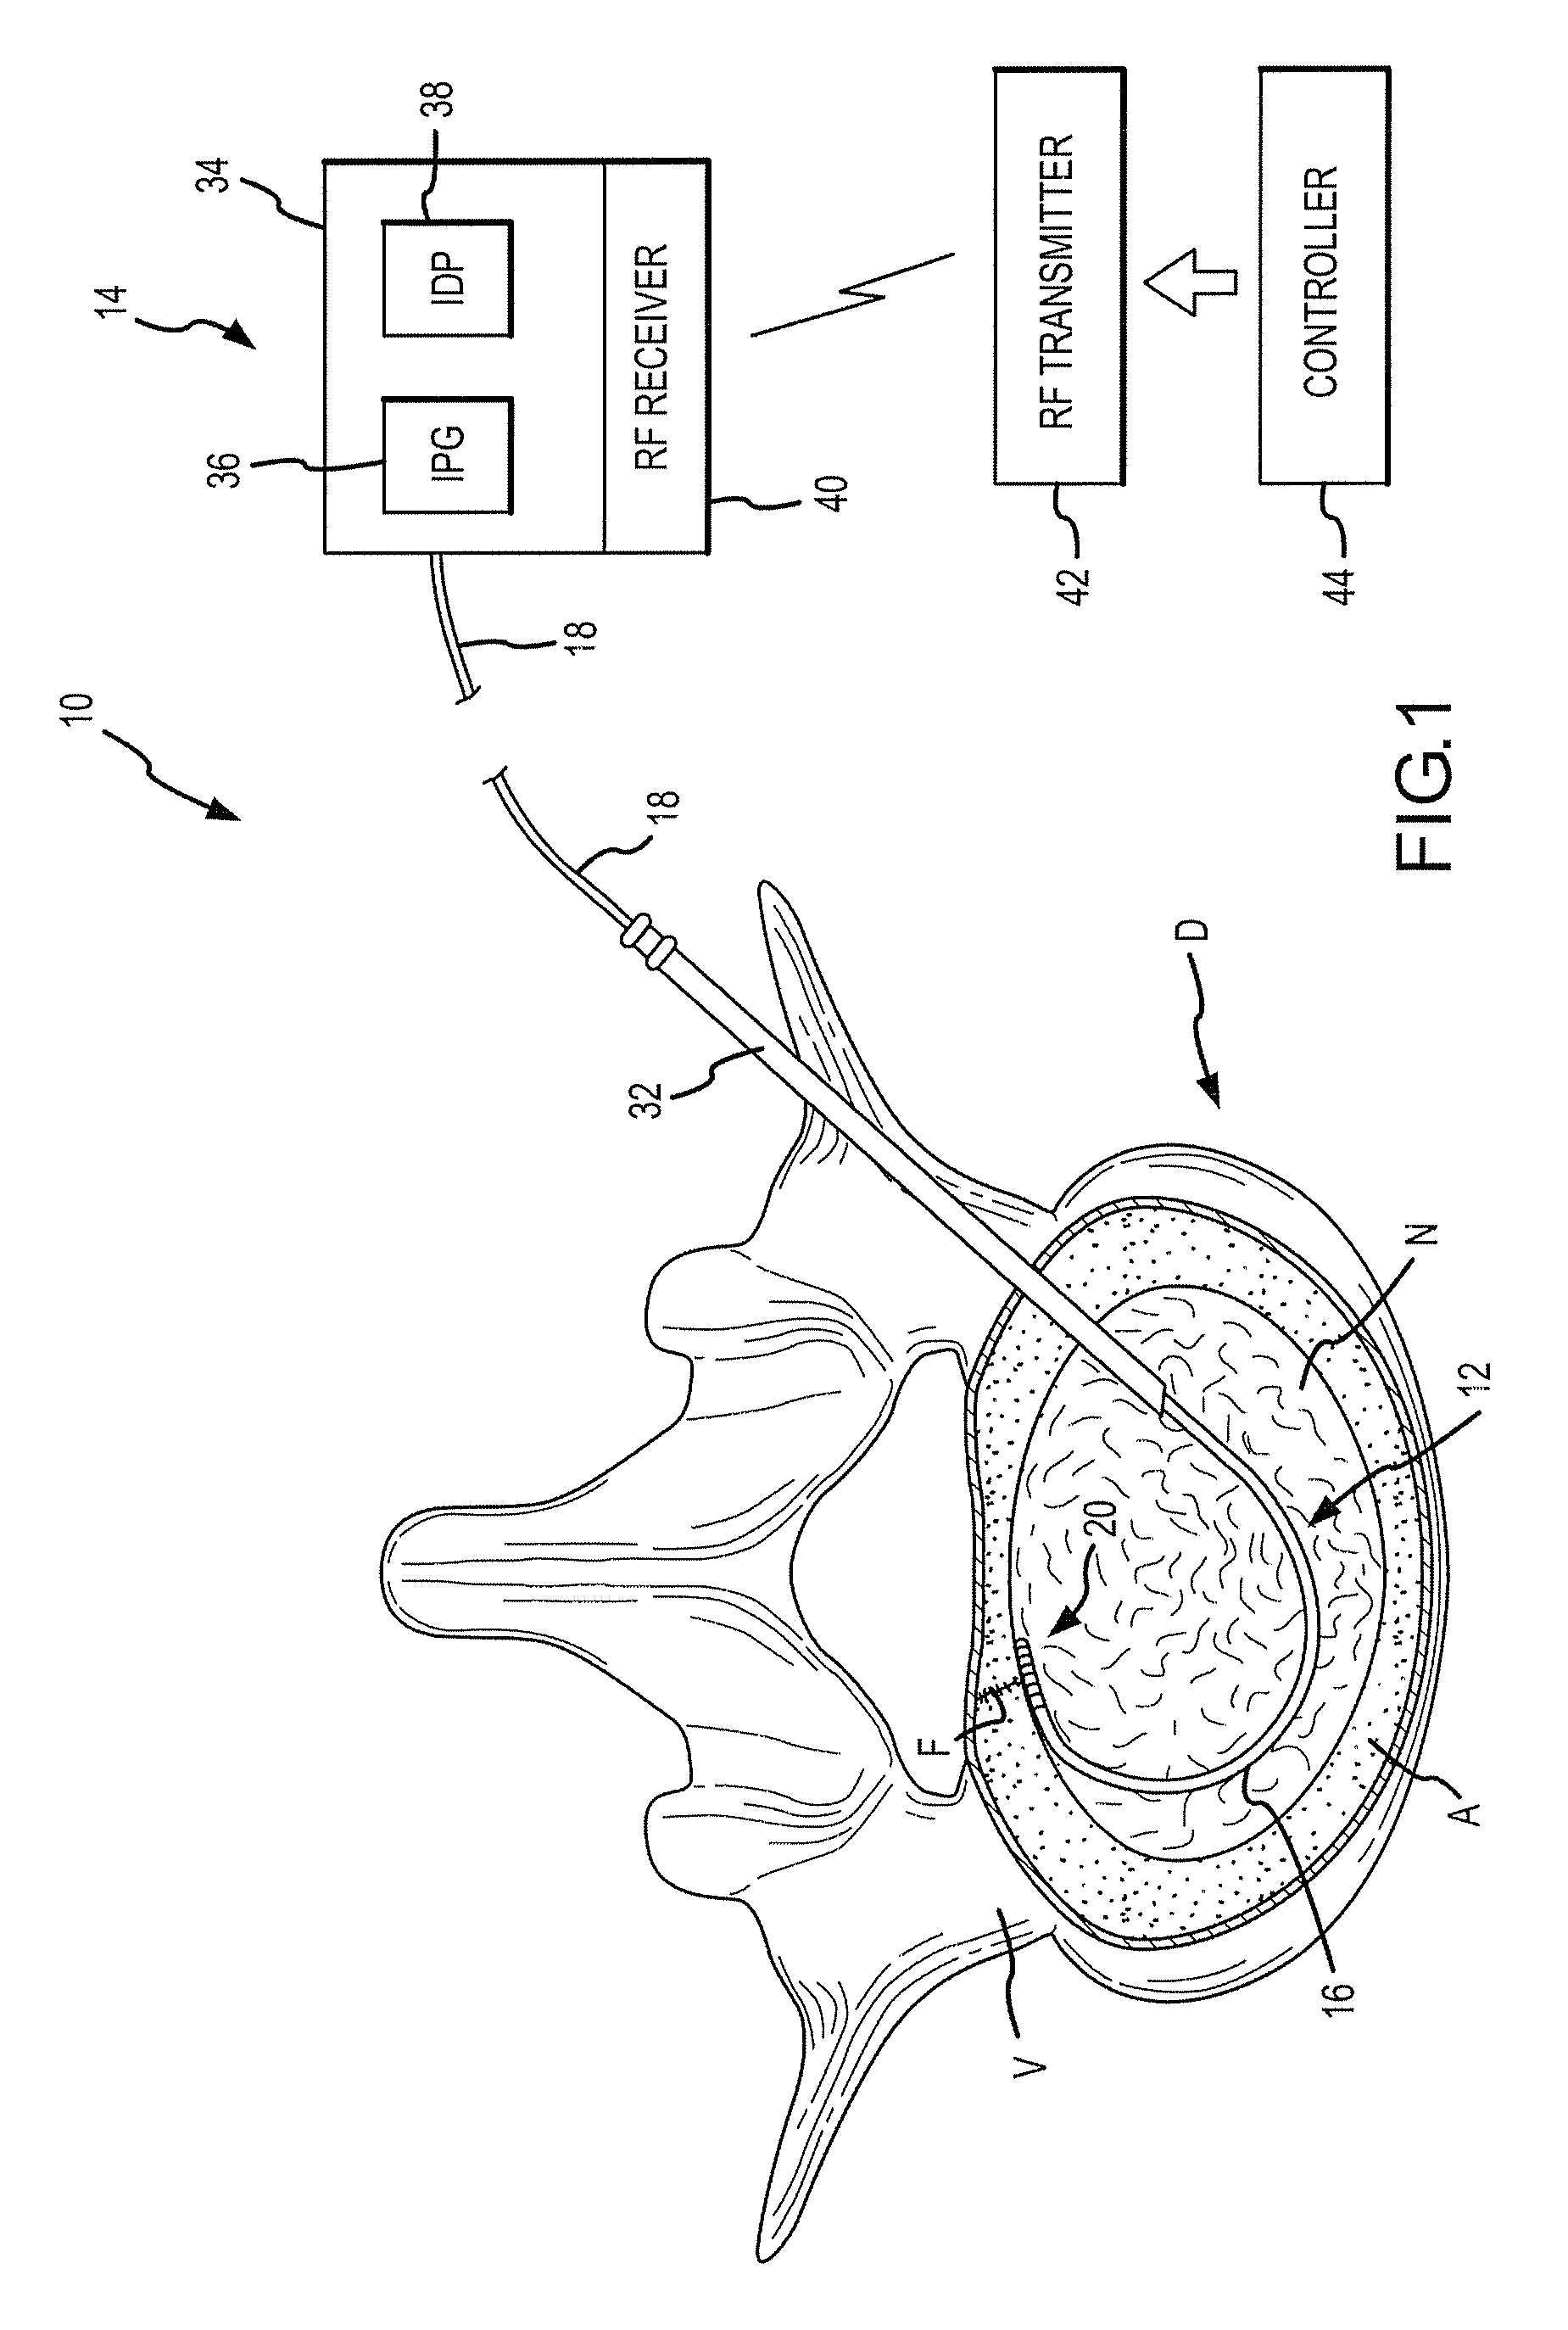 Combination Electrical Stimulating And Infusion Medical Device and Method